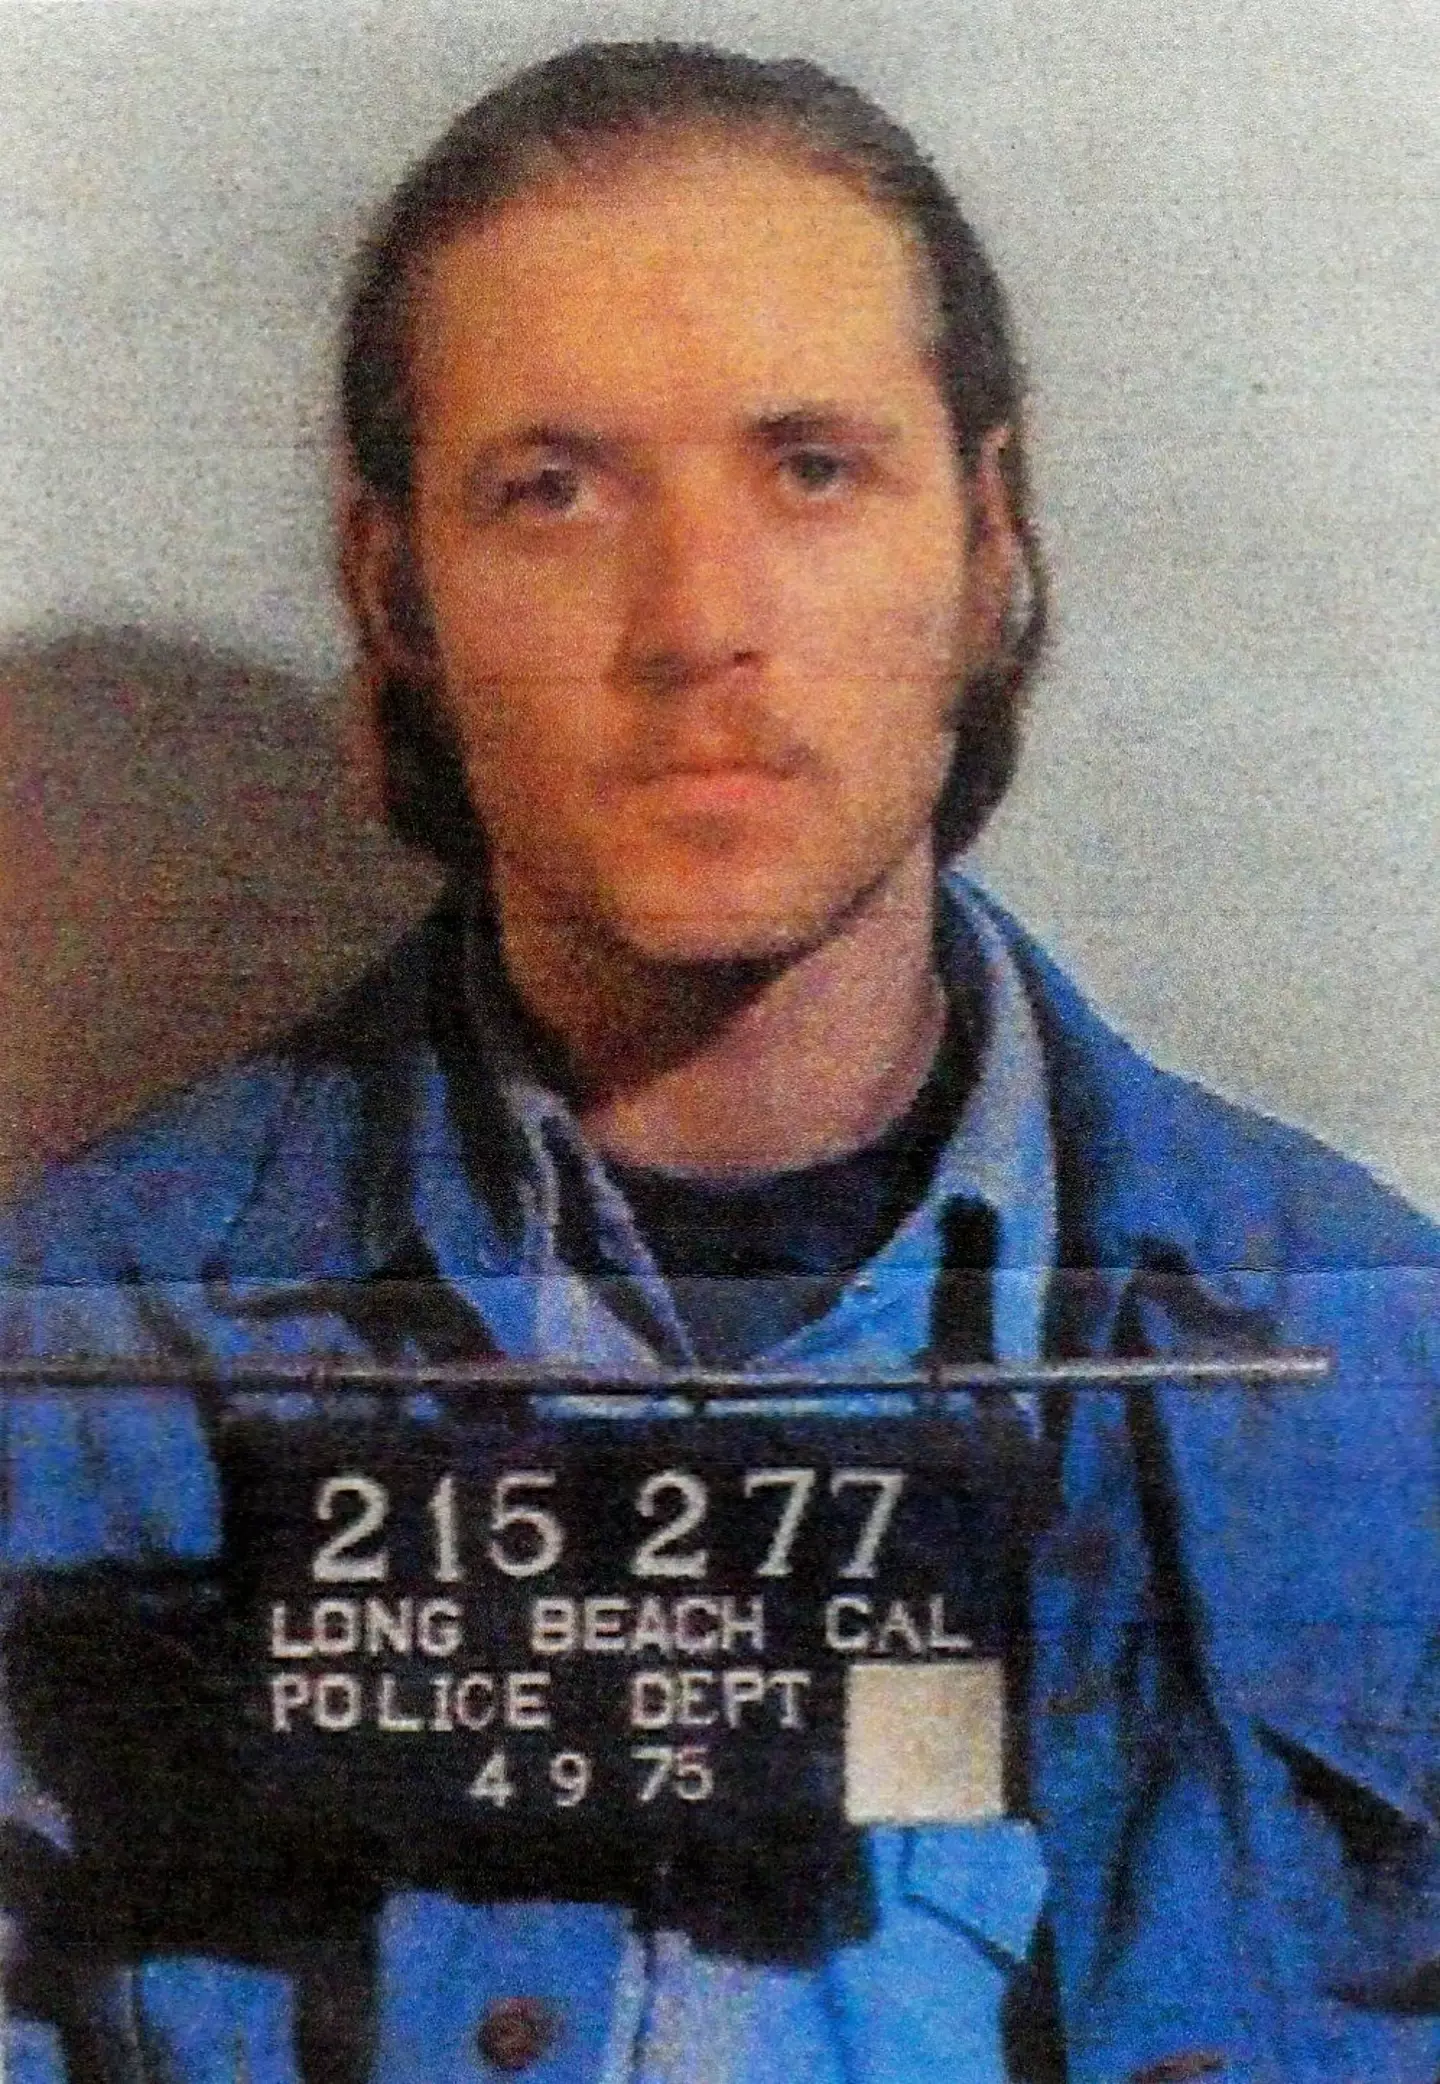 Silverstein's mugshot following an arrest for armed robbery in 1975.